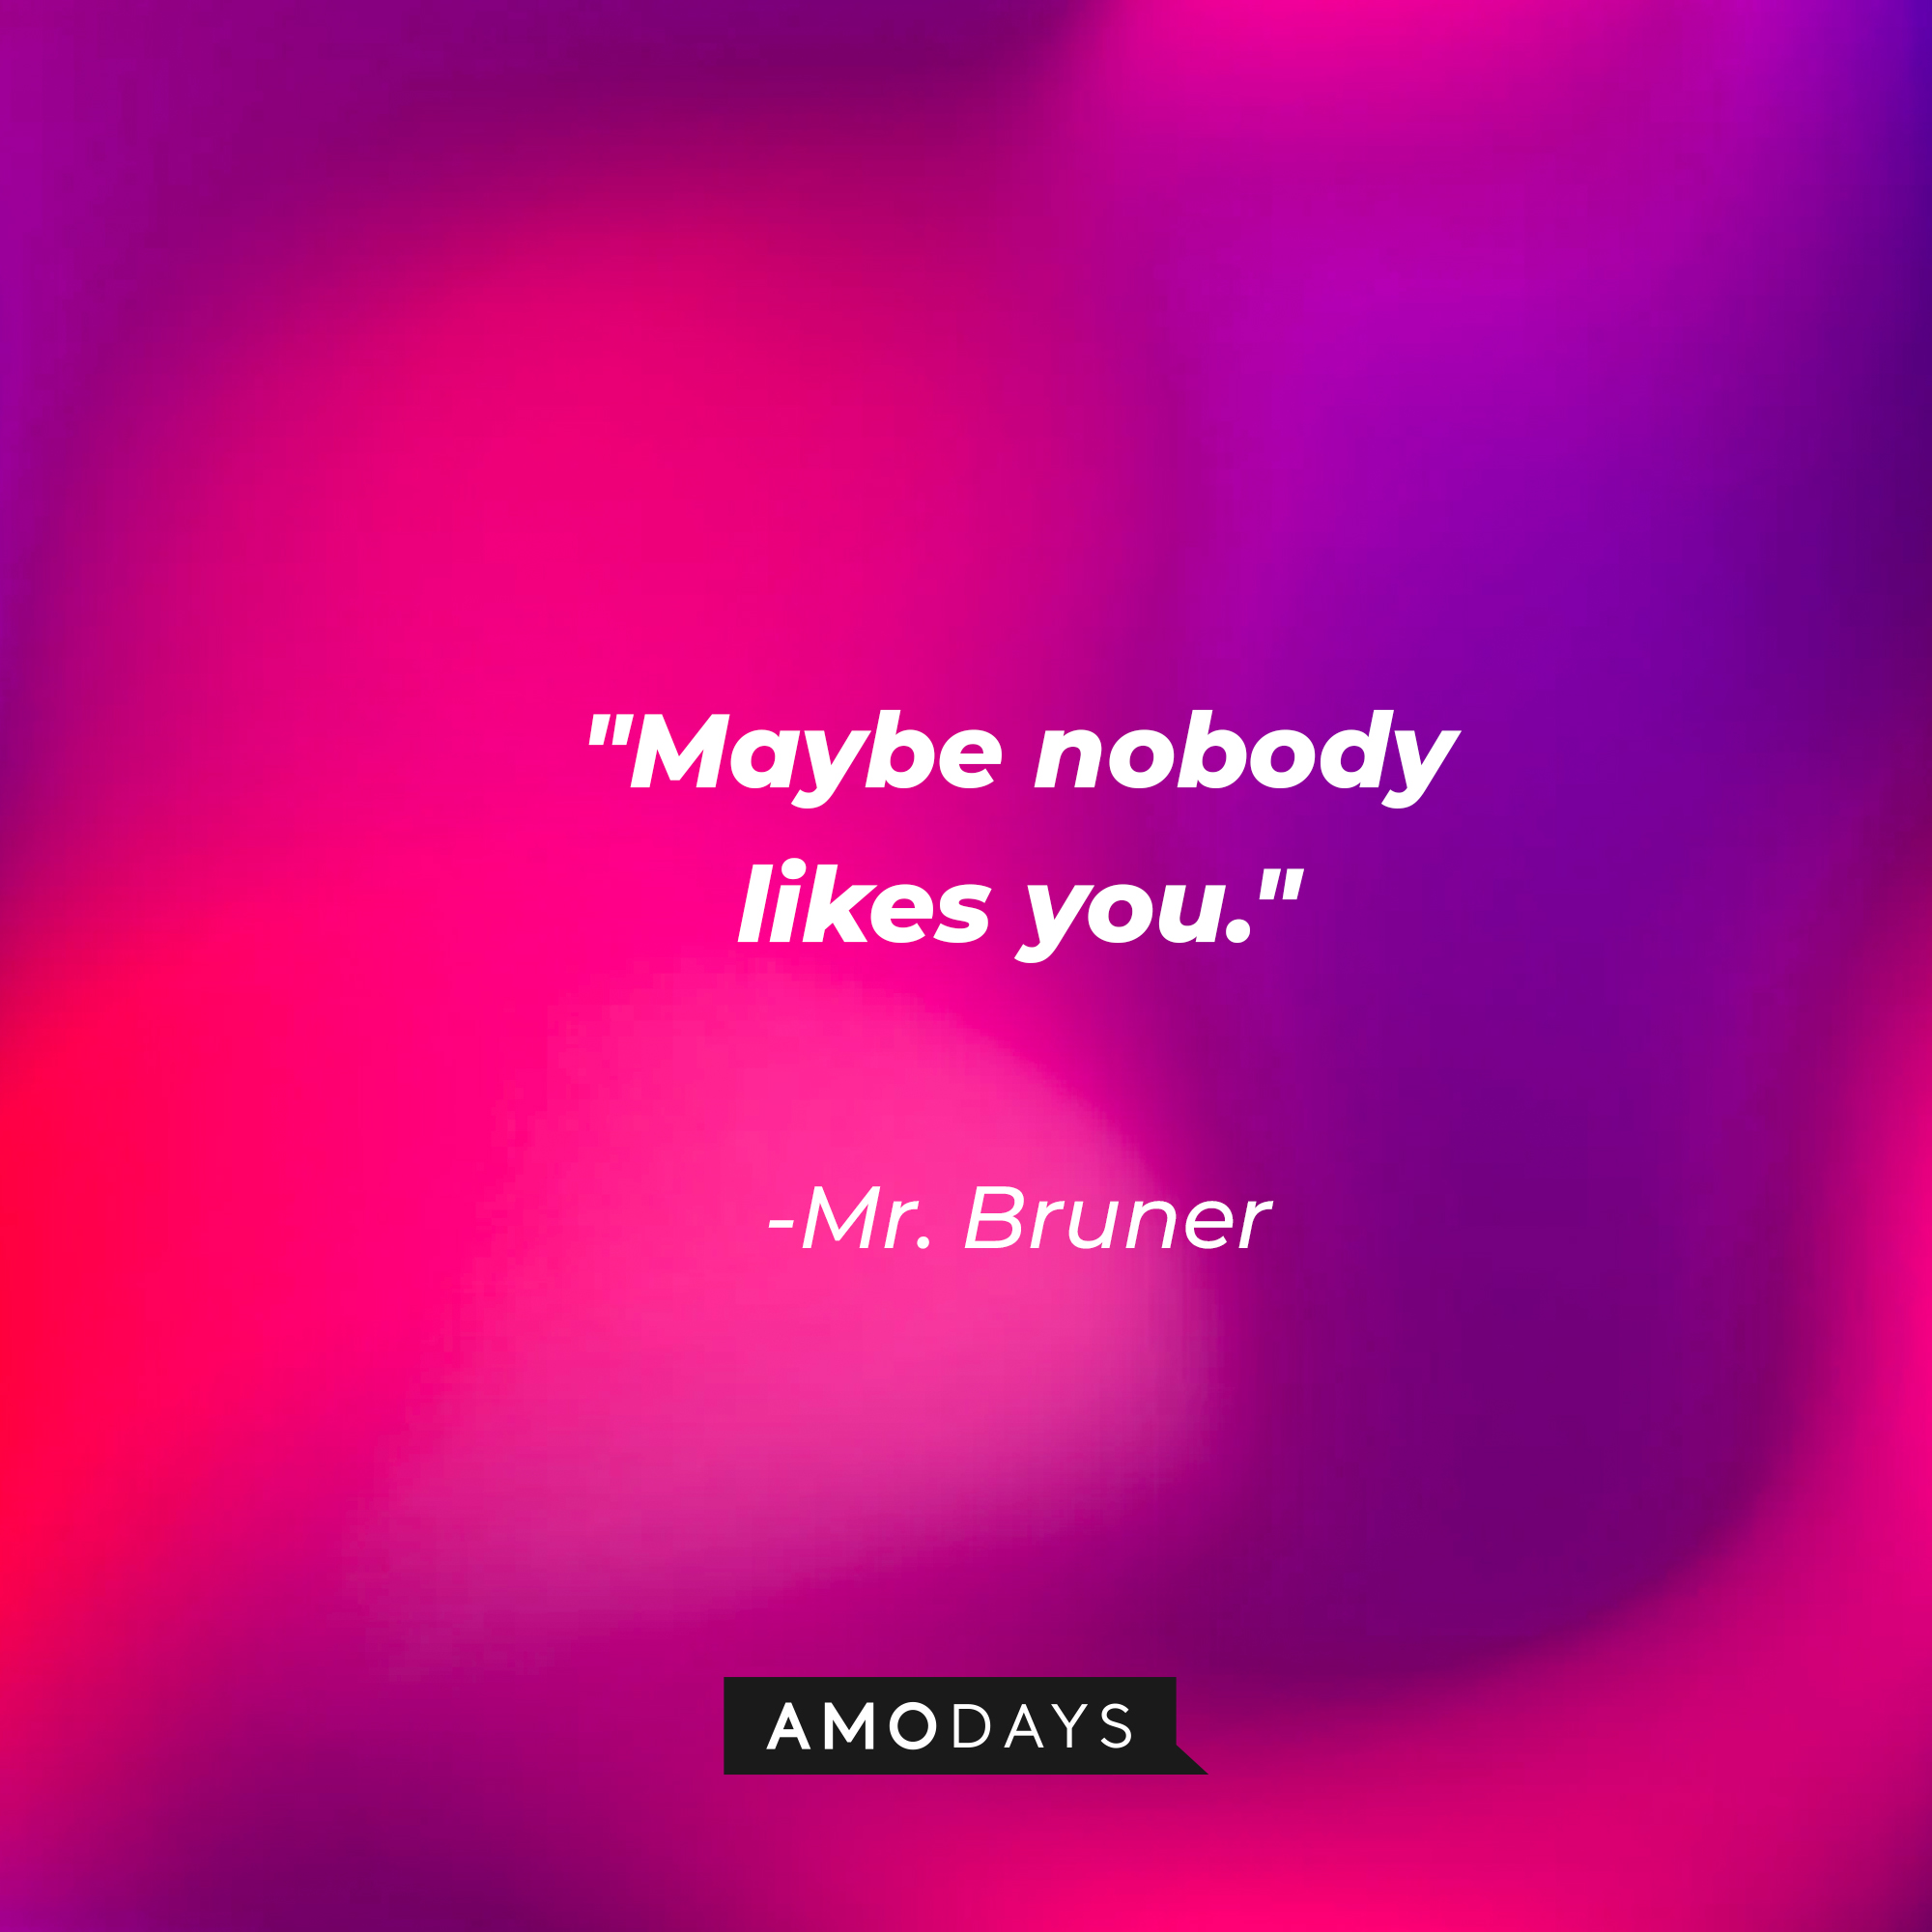 Mr. Bruner's quote: "Maybe nobody likes you." | Source: AmoDays